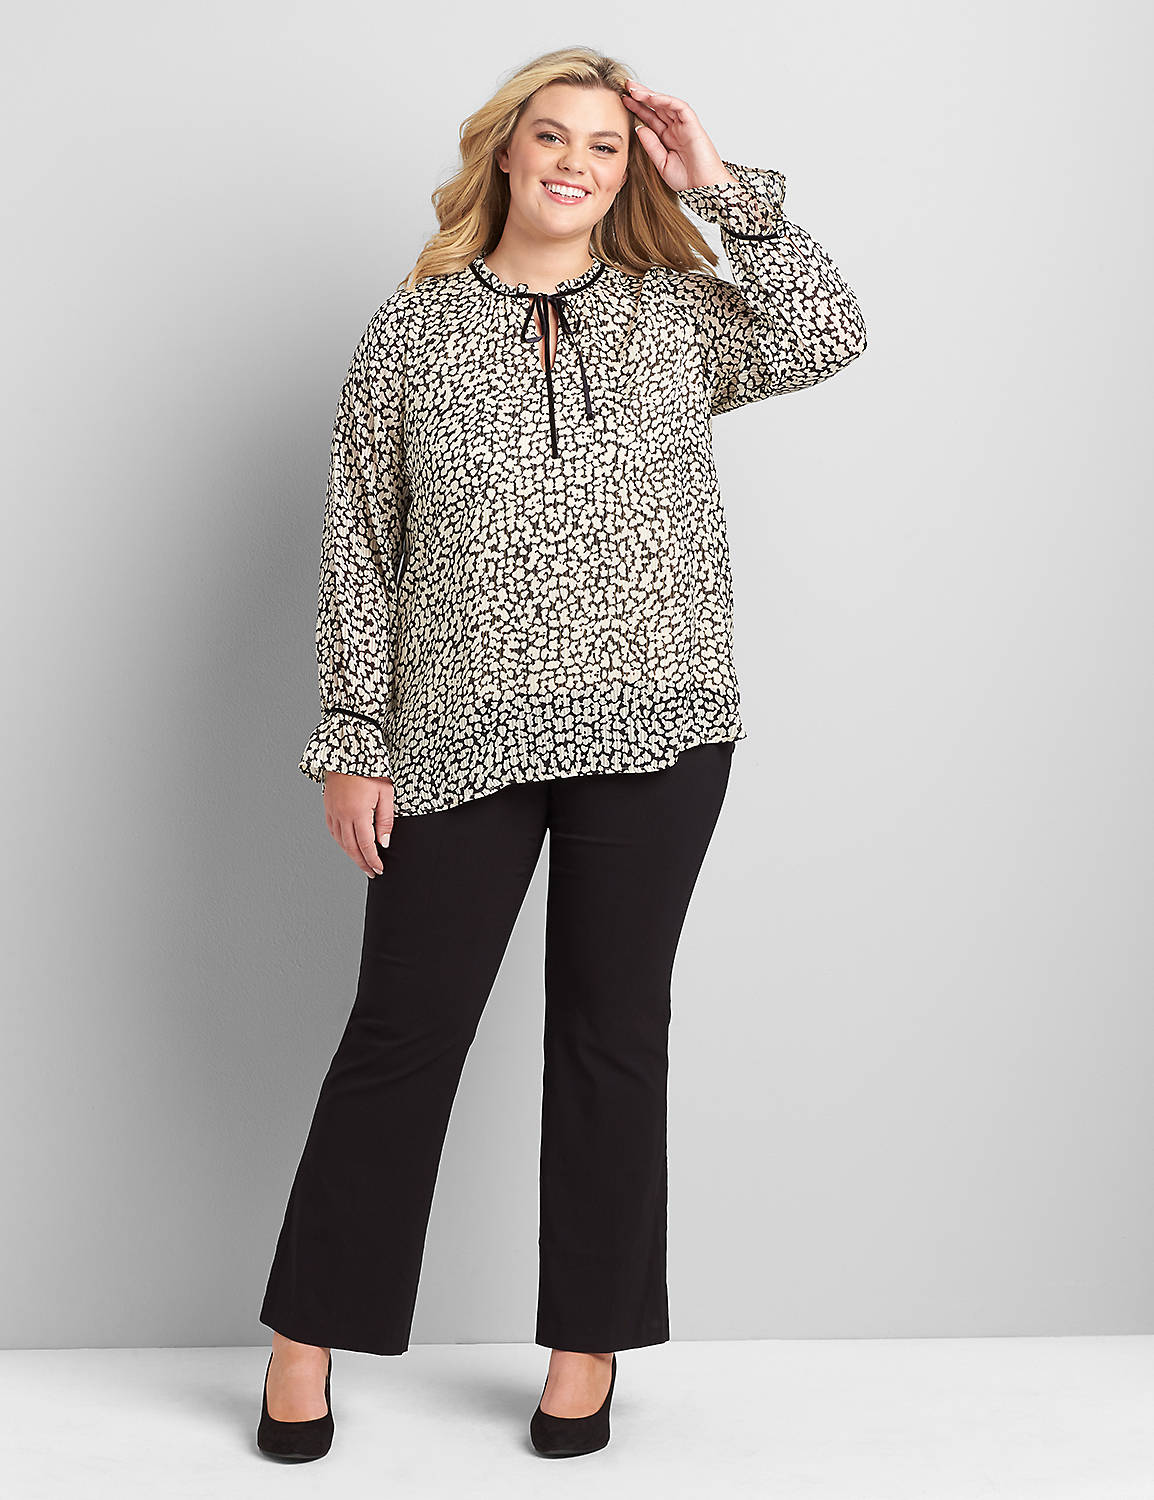 Long Sleeve Keyhole Ruffle Neck Blouse 1117154:LBH20215_WinterSpots_colorway1:22/24 Product Image 3